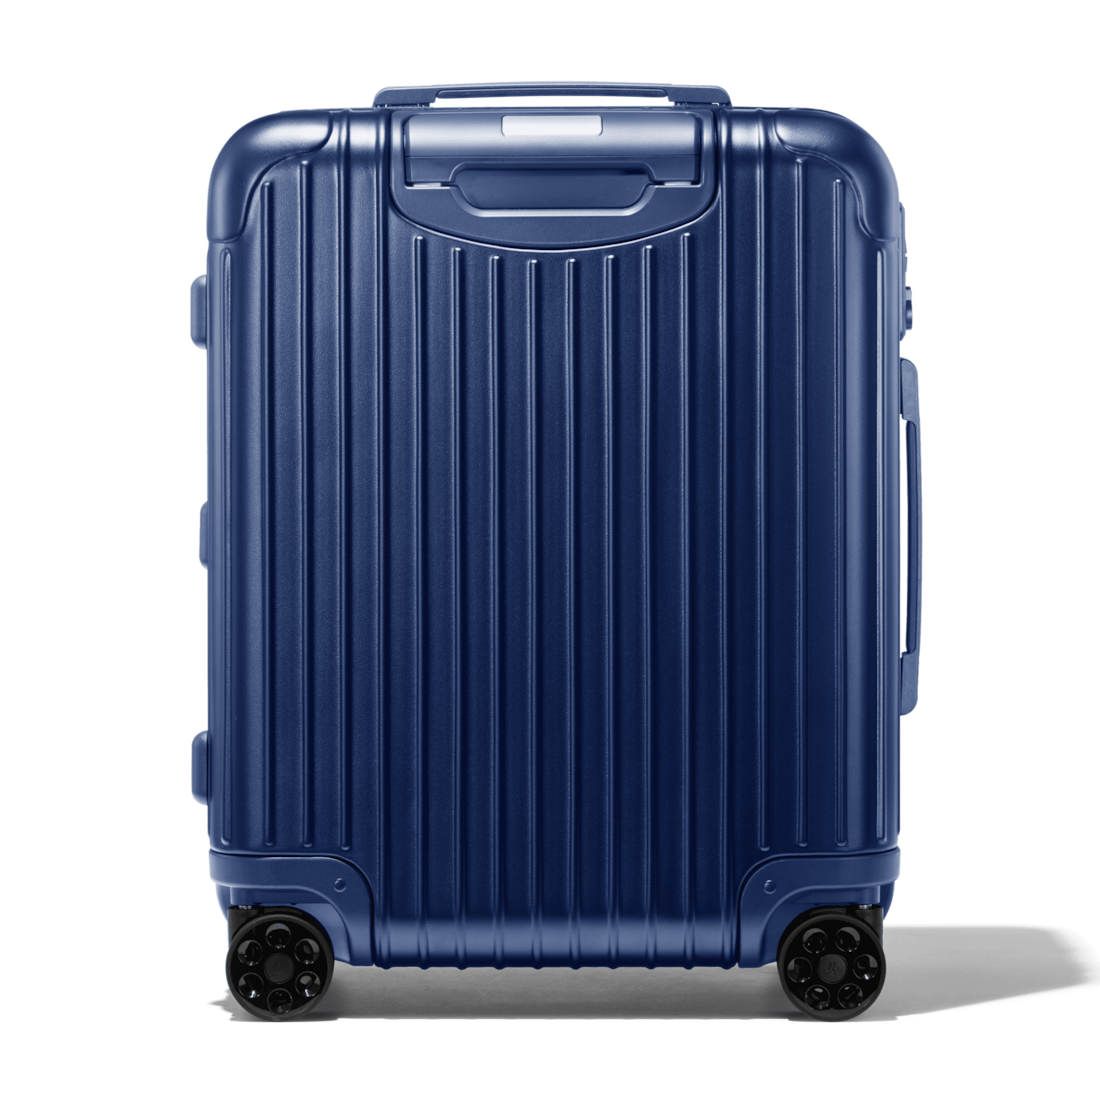 Rimowa Cabin Plus Carry-On - Is the Upgrade Worth It? - Luggage Unpacked